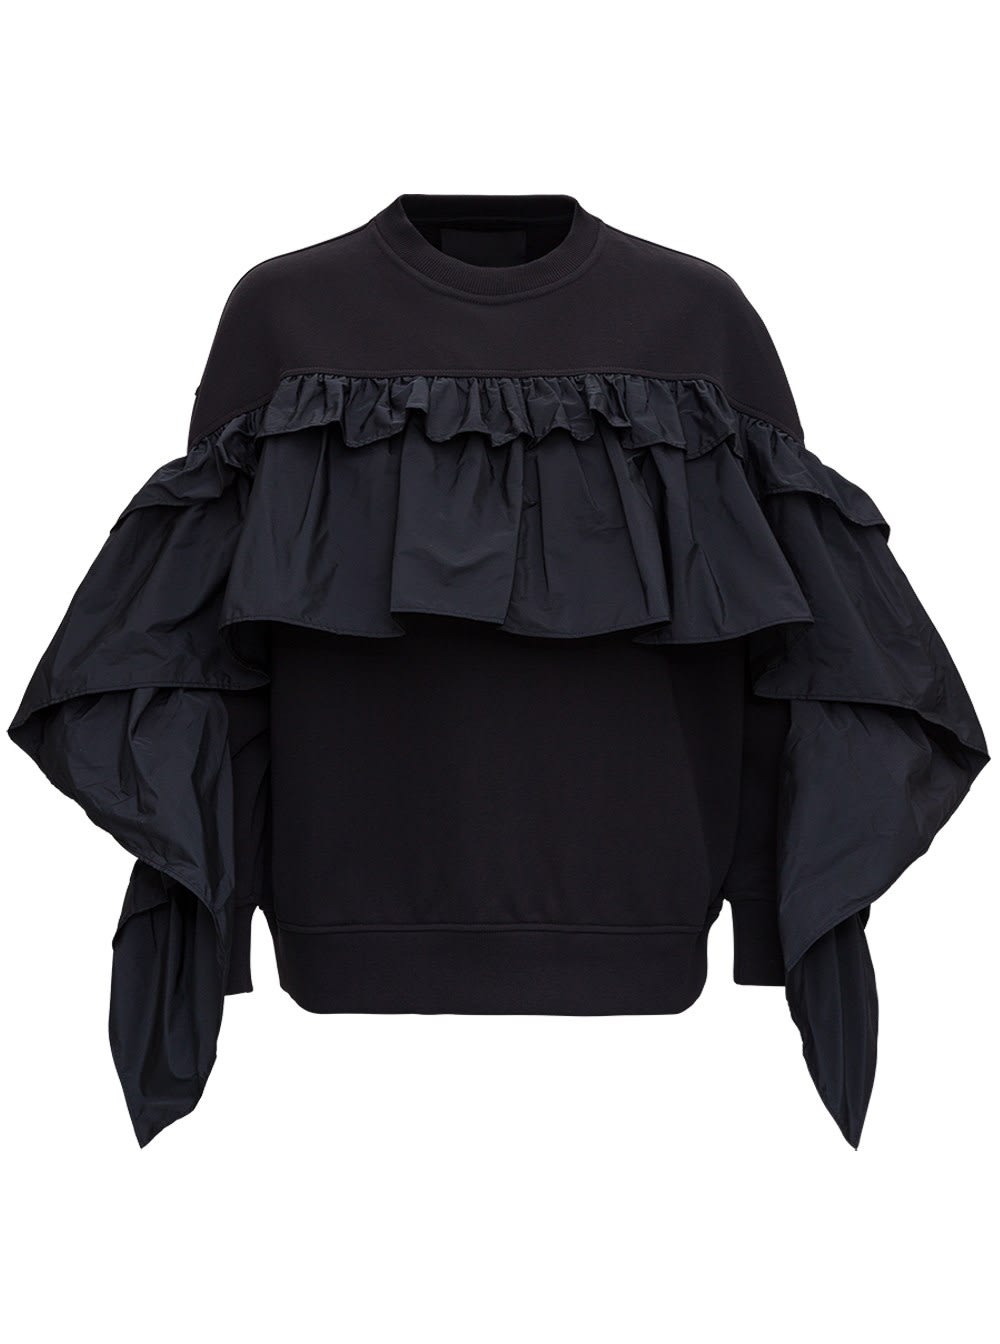 RED Valentino Black Jersey Sweatshirt With Flounce Detail